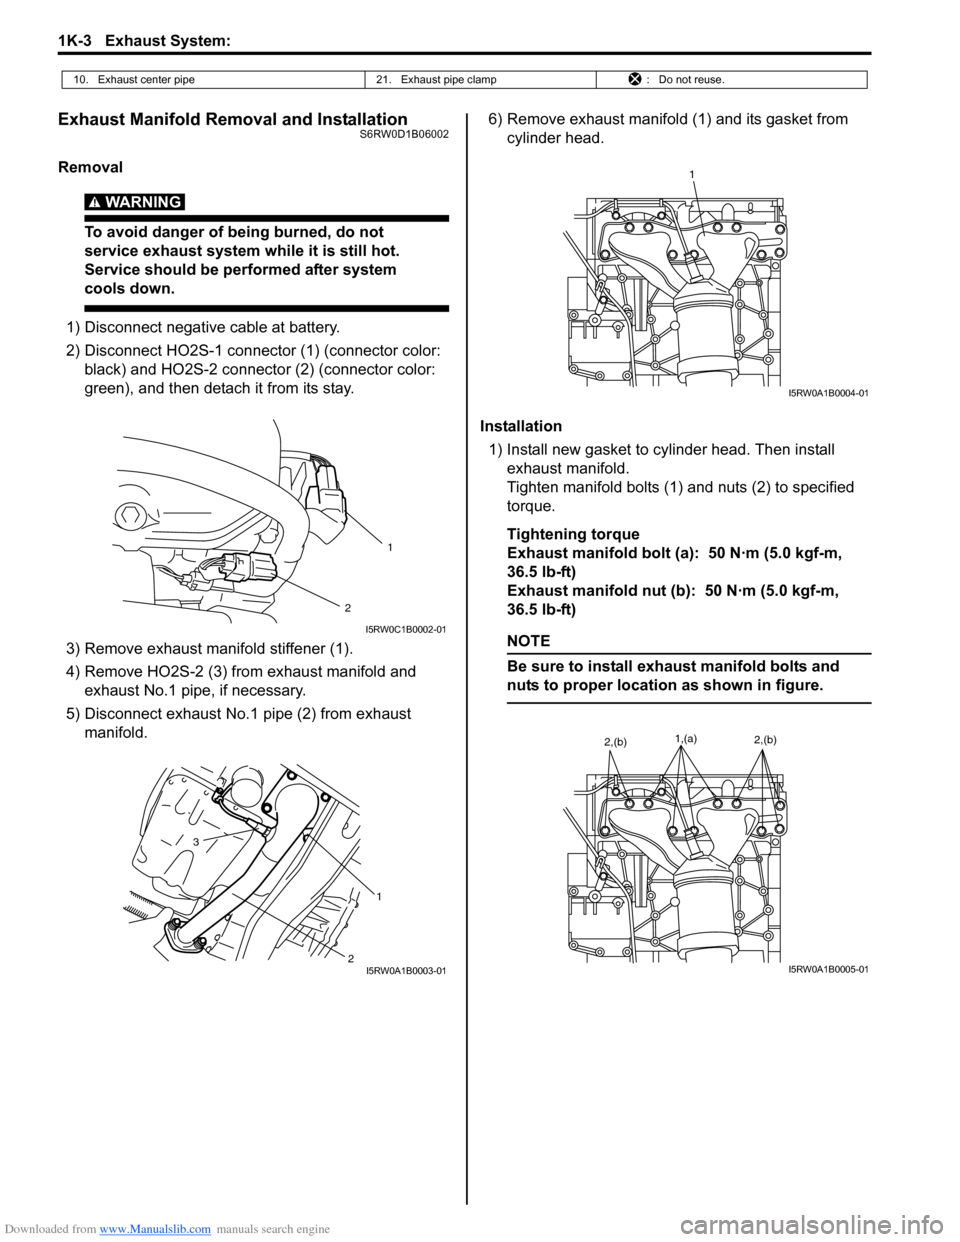 SUZUKI SX4 2006 1.G Service Workshop Manual Downloaded from www.Manualslib.com manuals search engine 1K-3 Exhaust System: 
Exhaust Manifold Removal and InstallationS6RW0D1B06002
Removal
WARNING! 
To avoid danger of being burned, do not 
service